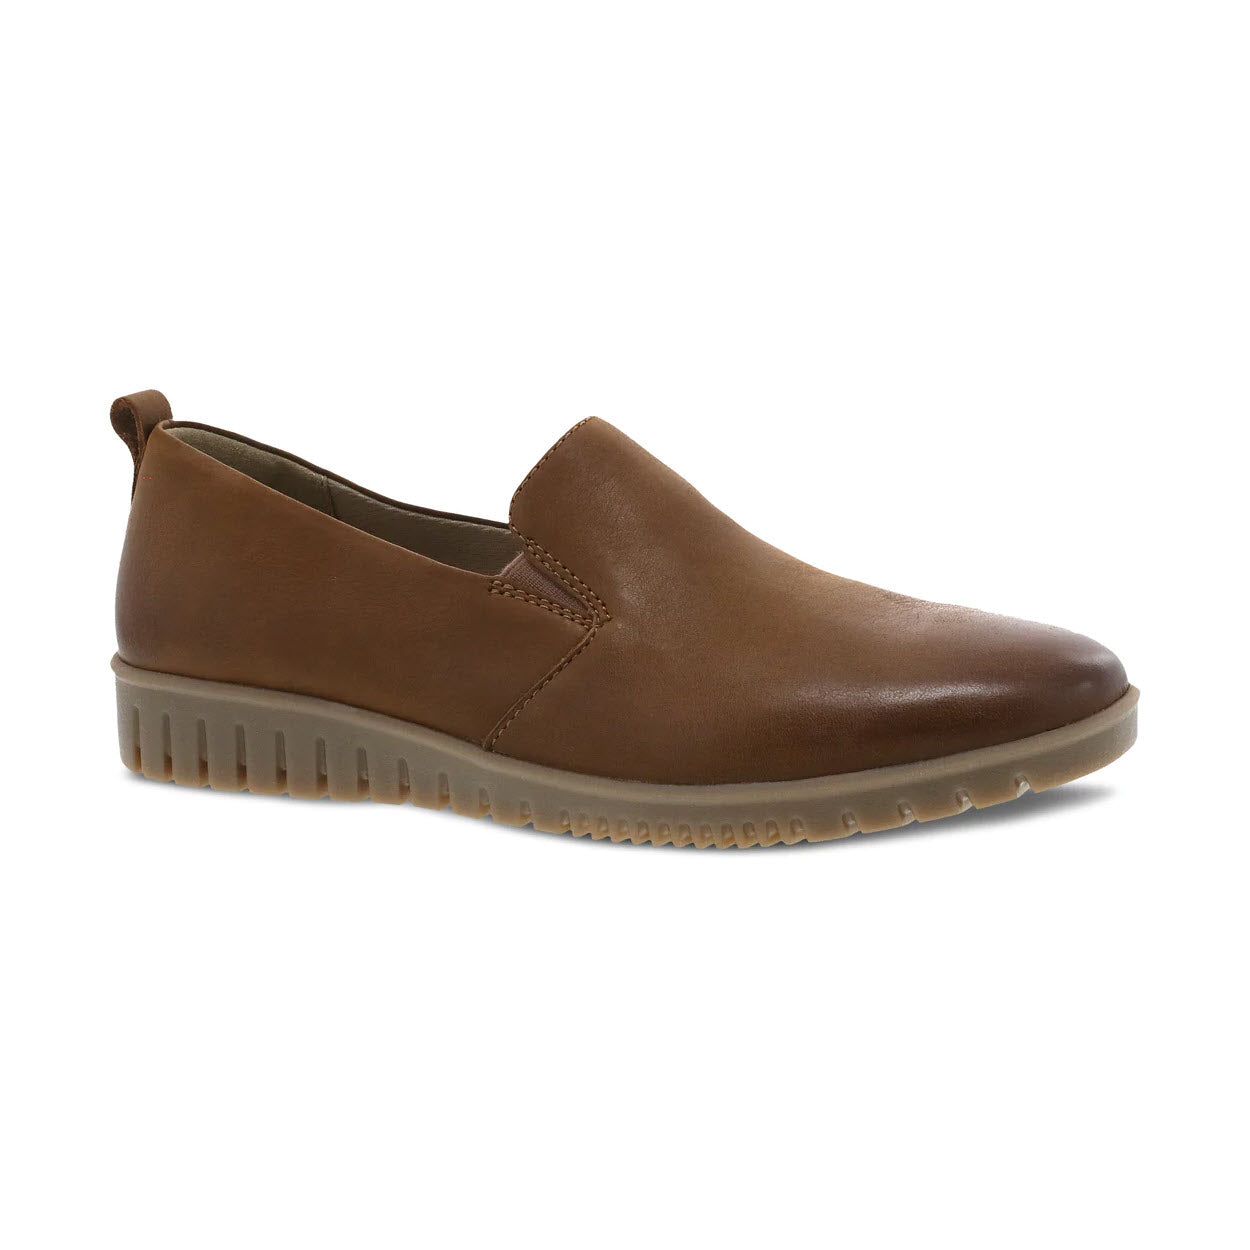 A Dansko Linley Tan Burnished slip-on shoe with a thick, ridged sole and molded arch shape, isolated on a white background.